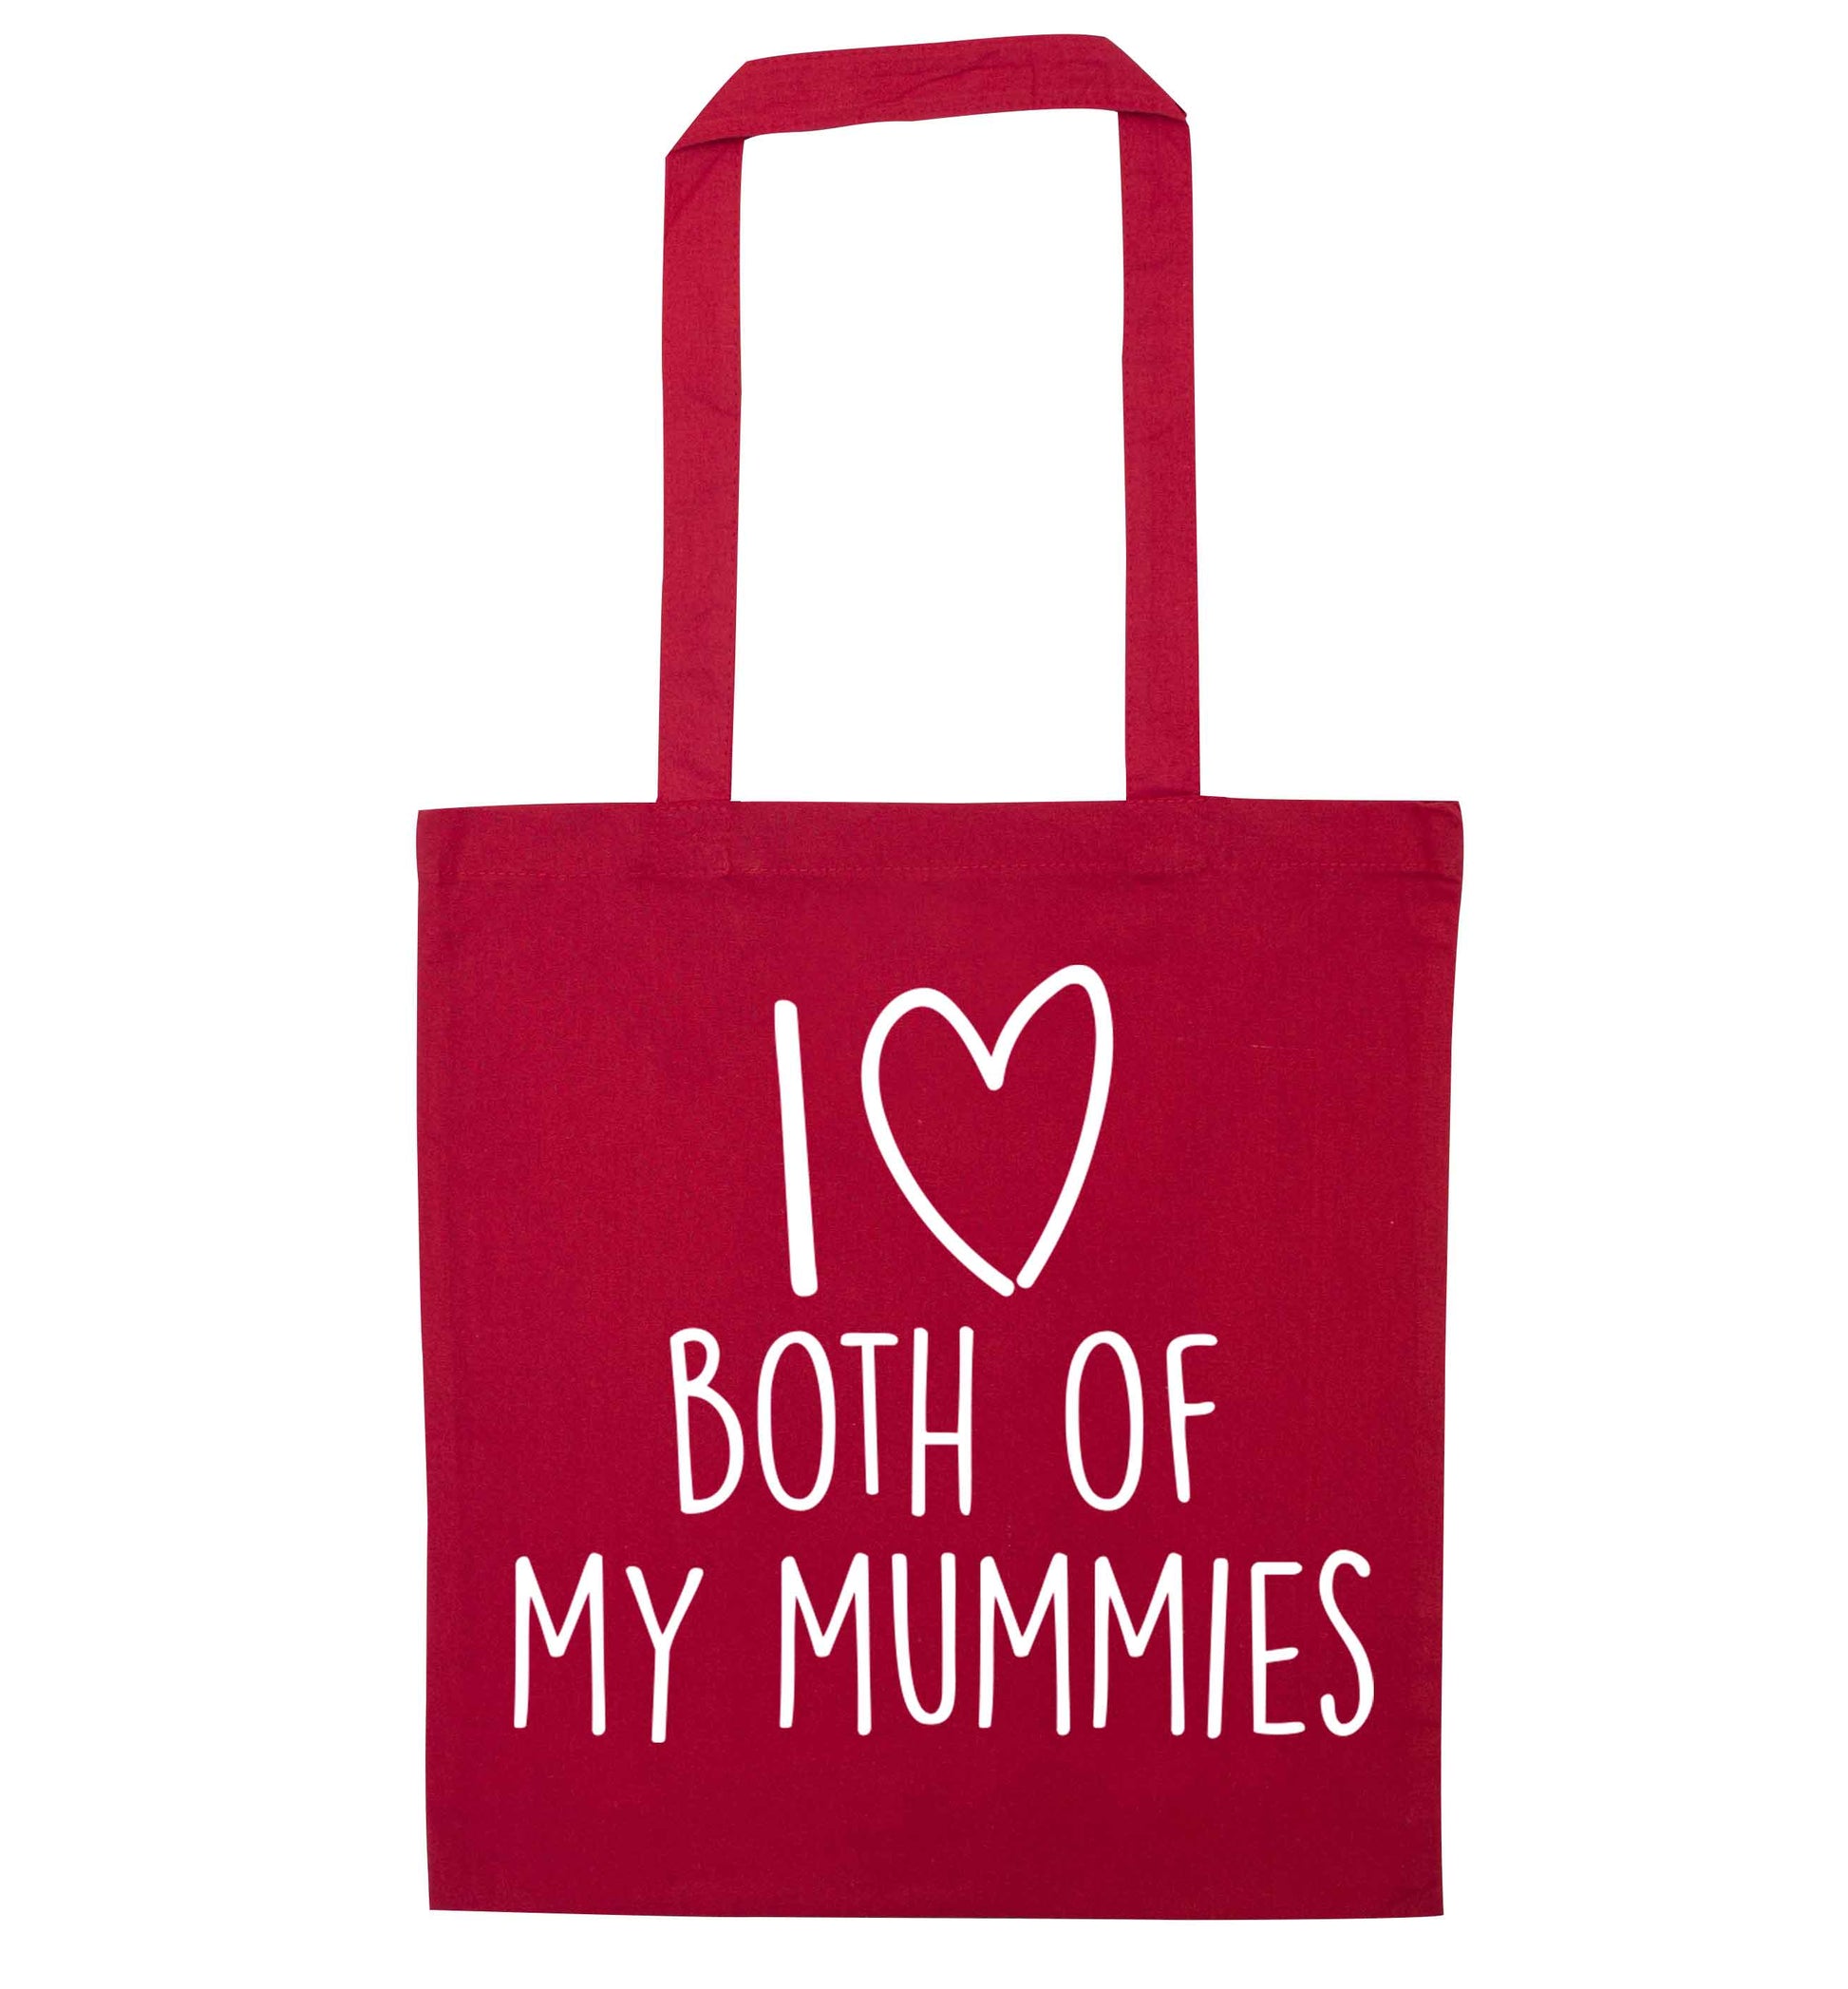 I love both of my mummies red tote bag